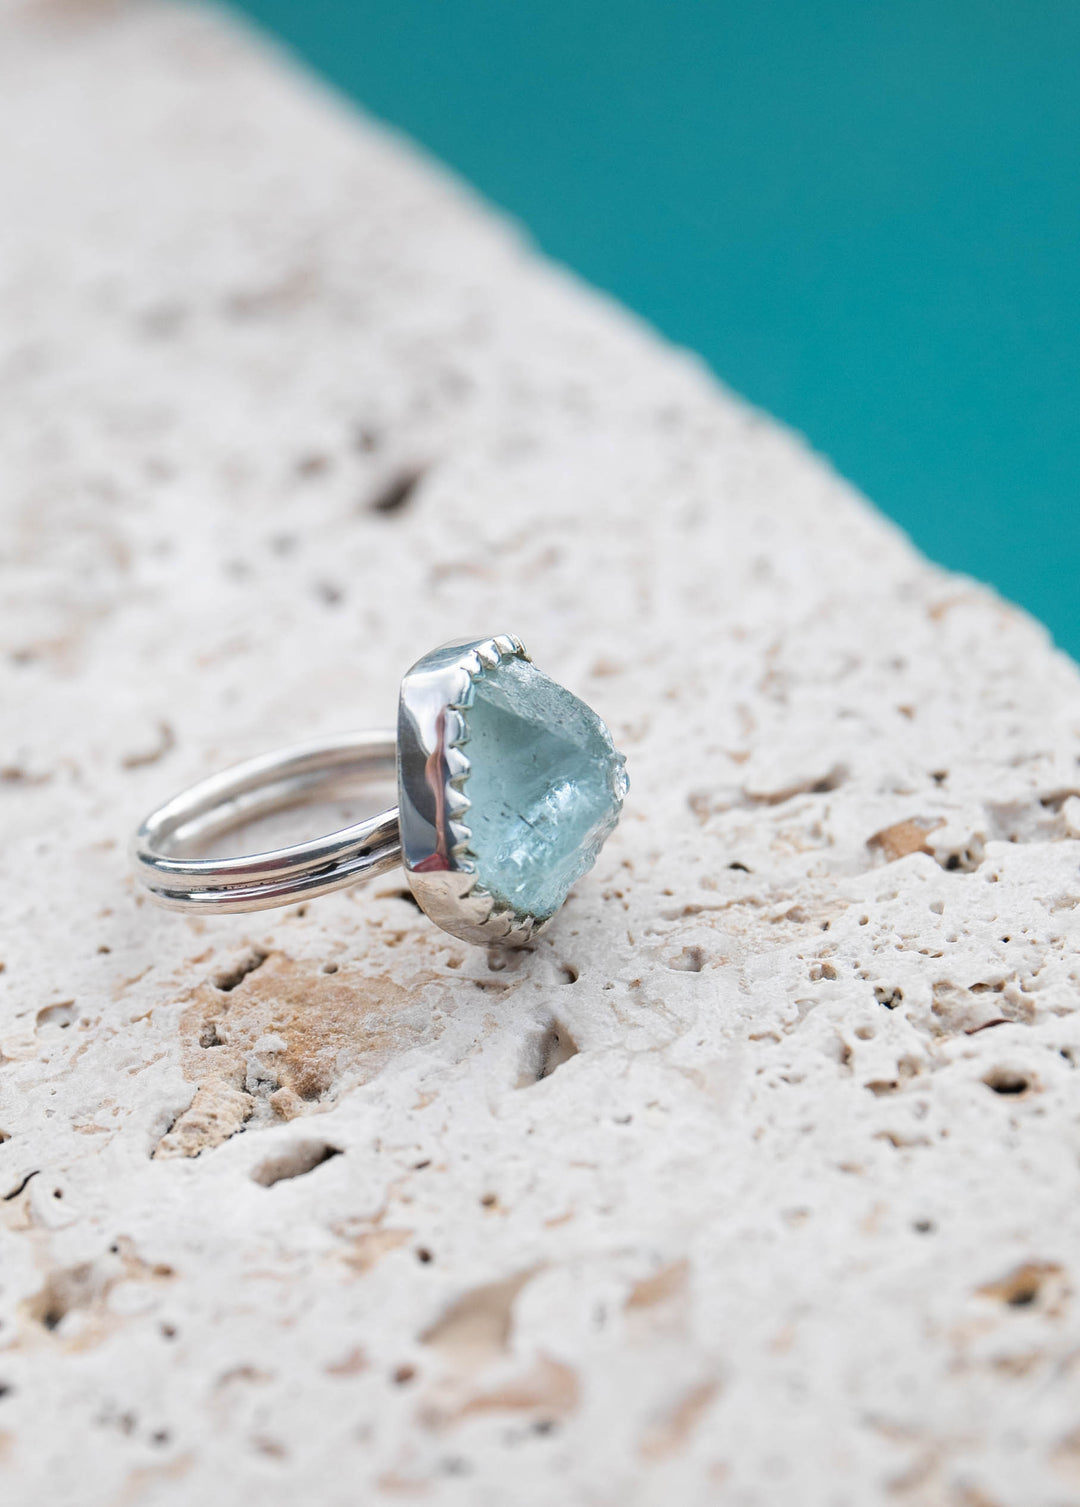 Raw Aquamarine Ring in Unique Sterling Silver Setting - Size 7 US